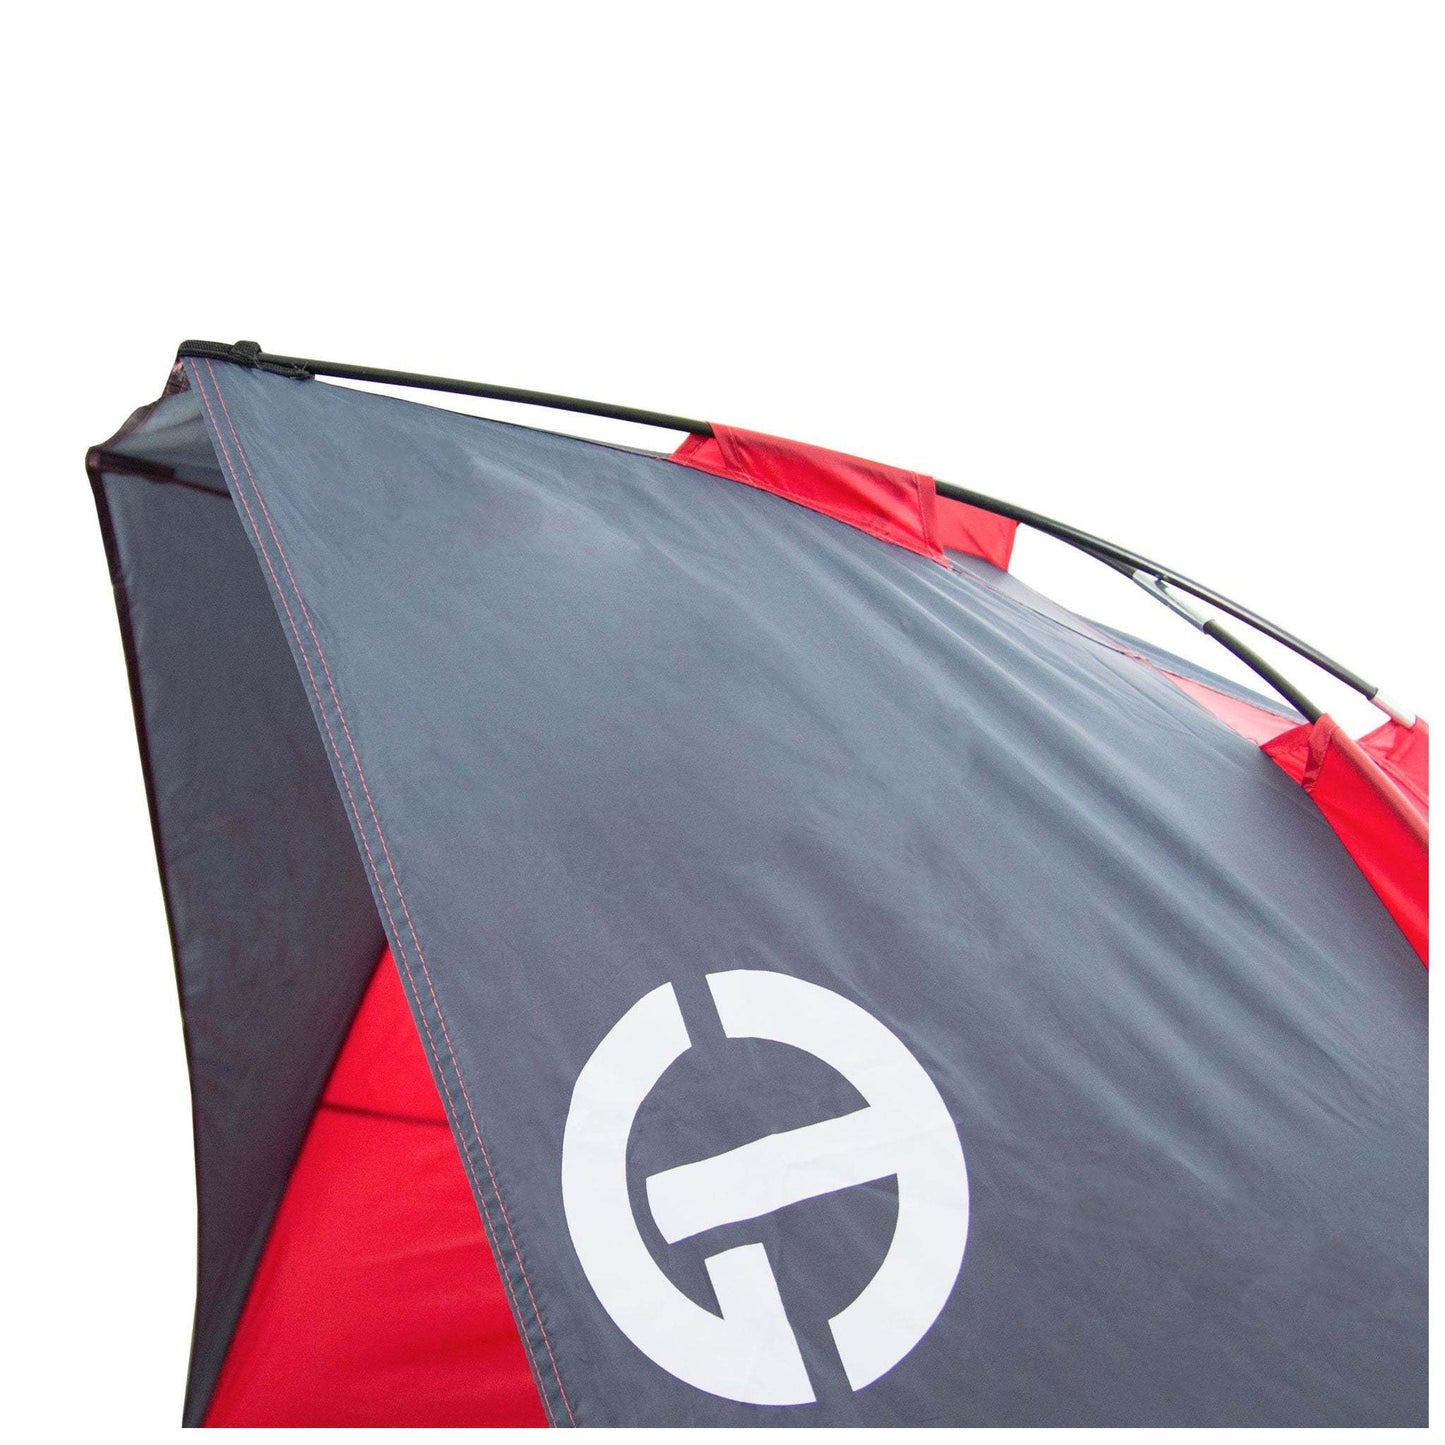 Tahoe Gear Cruz Bay Summer Sun Shelter and Beach Shade Tent Canopy - Coral Red - Selzalot